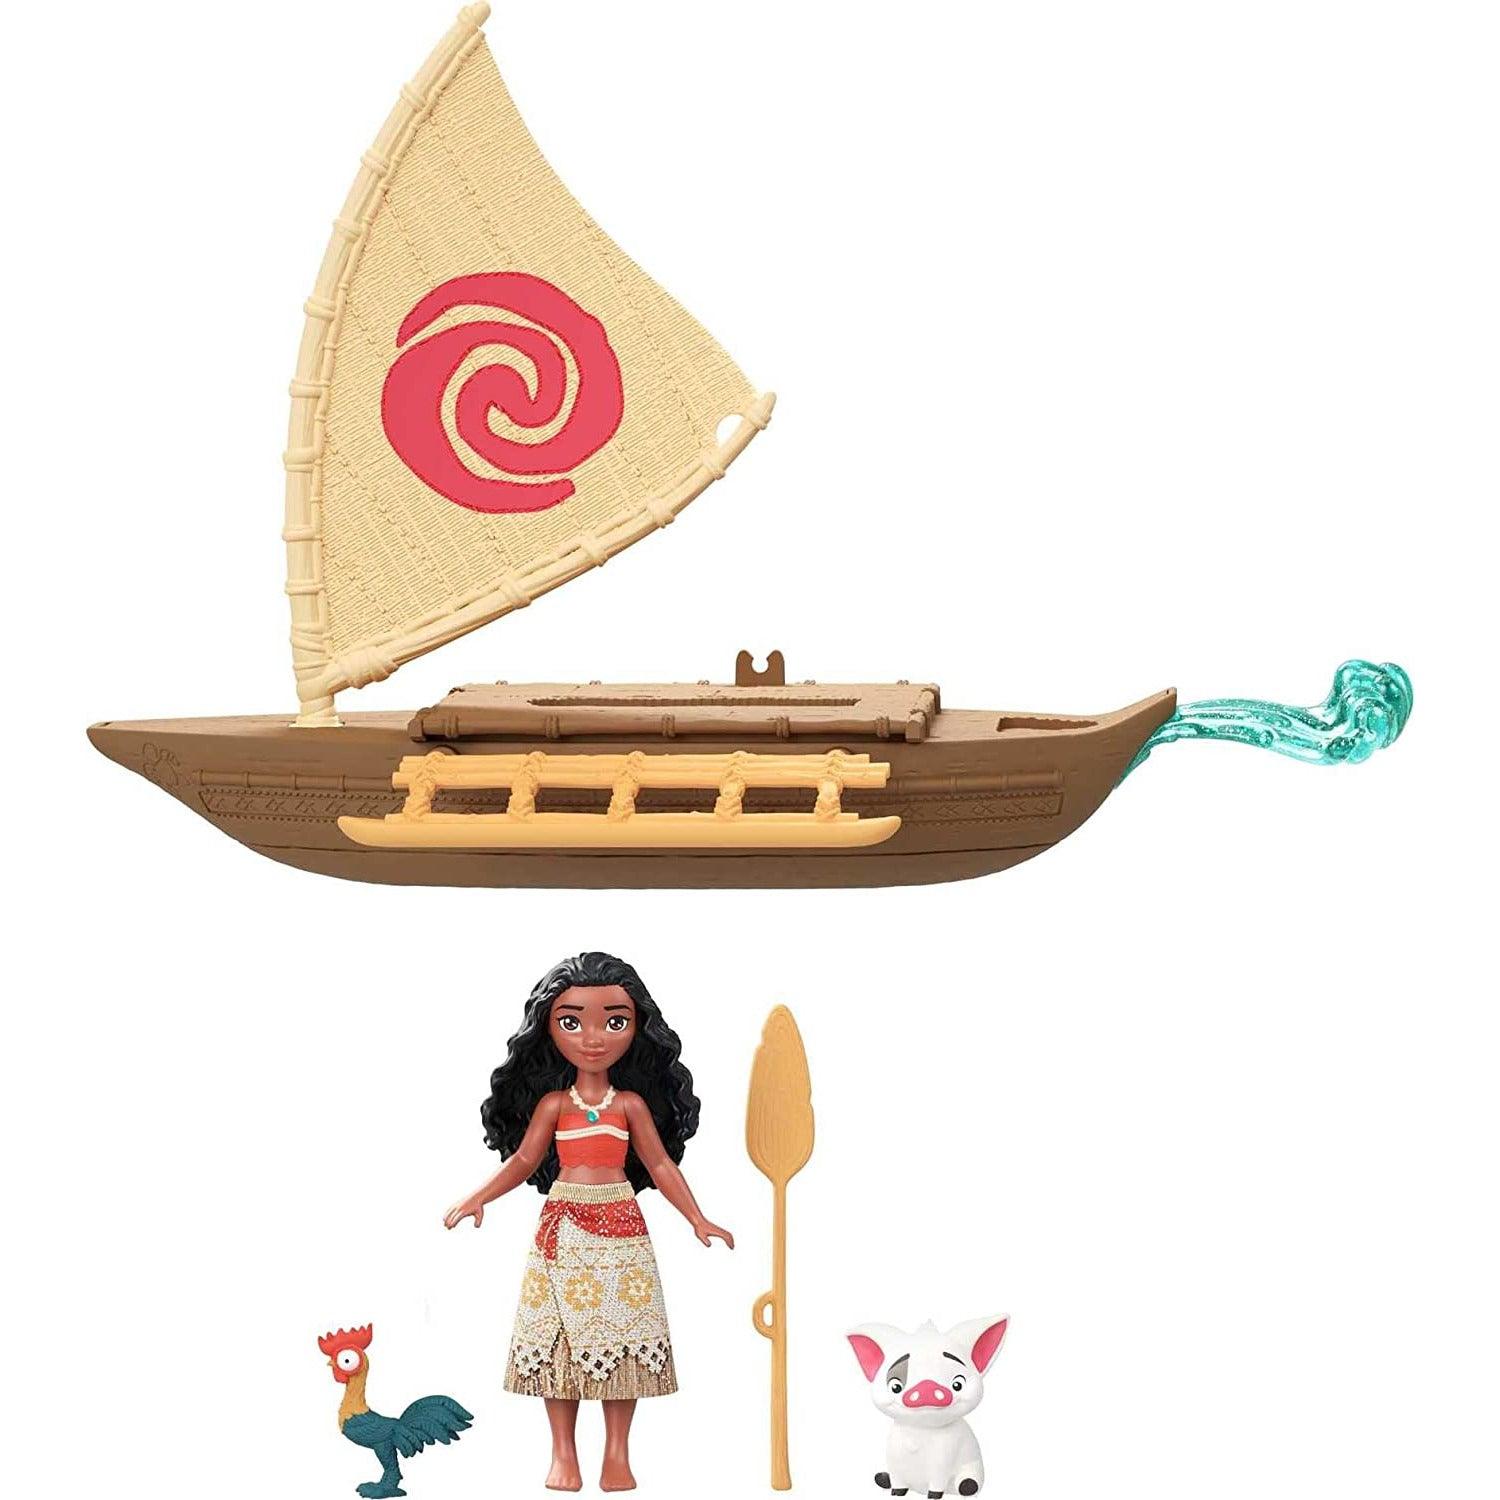 Disney Princess Toys, Moana Small Doll and Floating Boat with 2 Friend Figures - BumbleToys - 5-7 Years, Disney Princess, Fashion Dolls & Accessories, Girls, Moana, Pre-Order